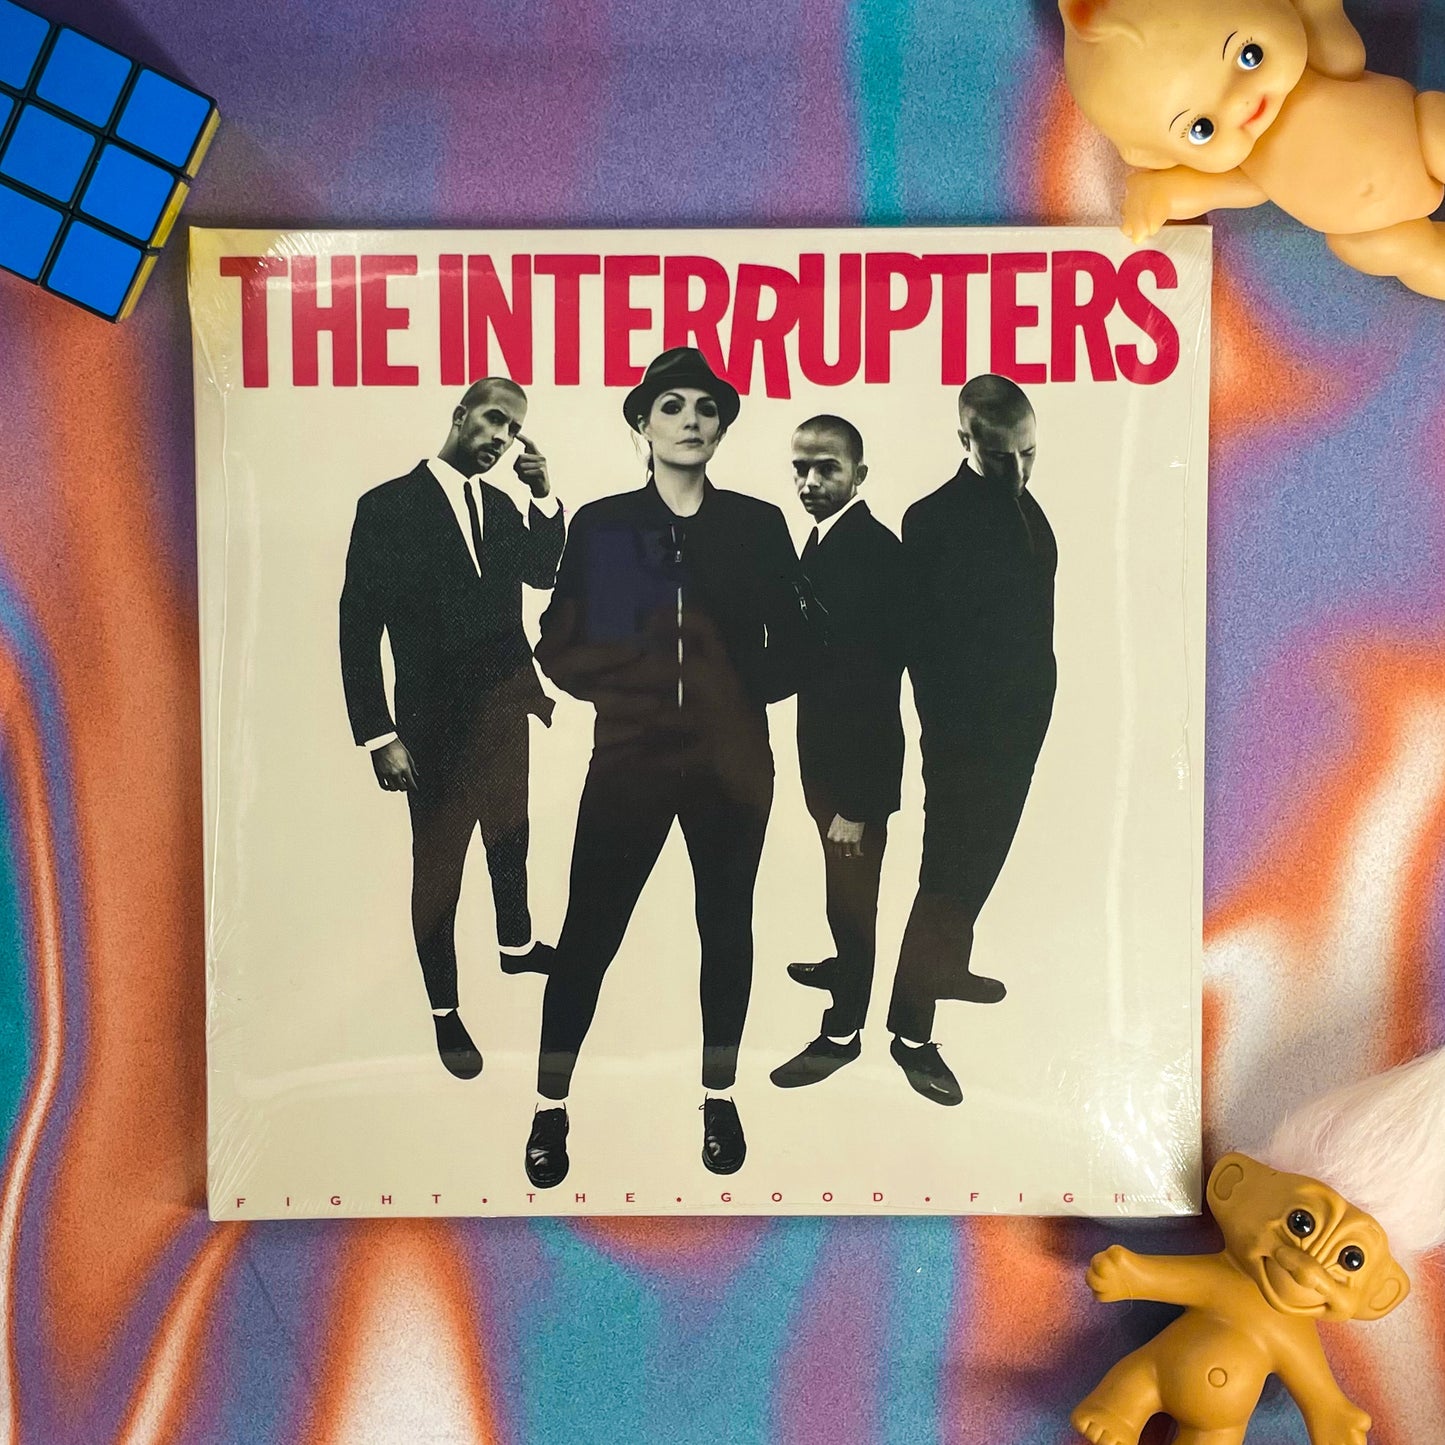 THE INTERRUPTERS - FIGHT THE GOOD FIGHT